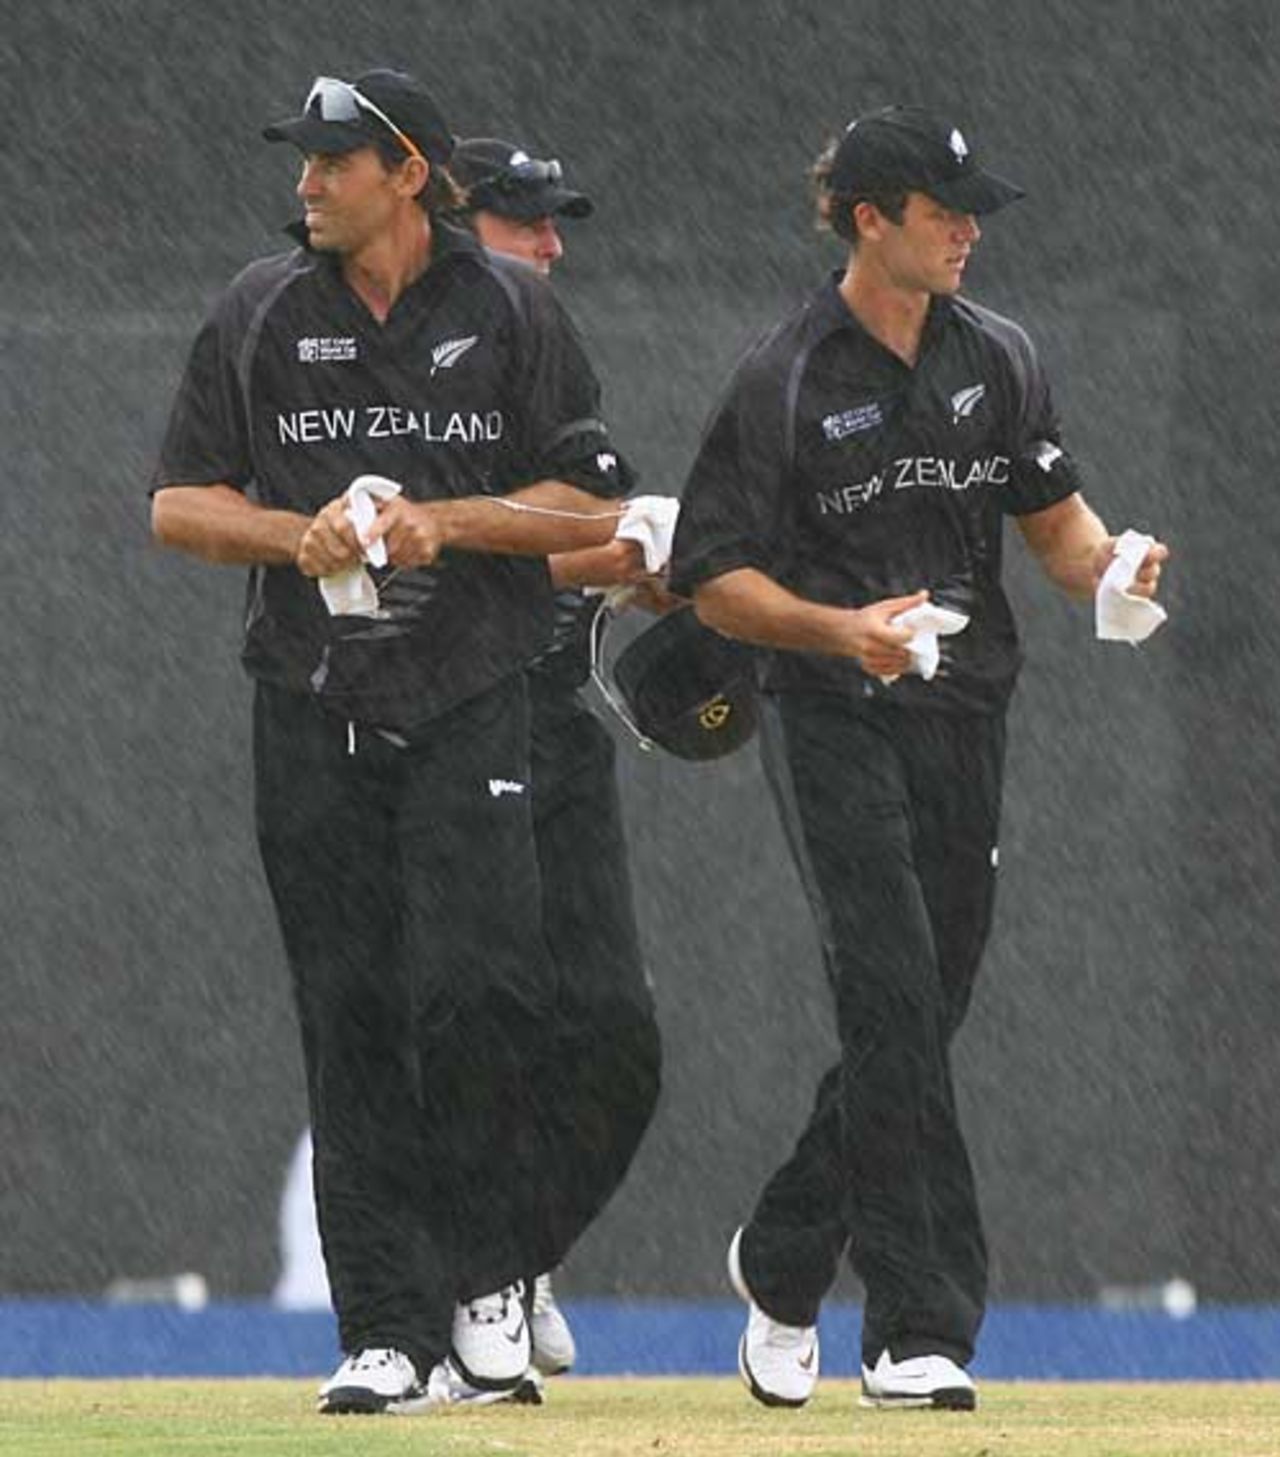 New Zealand's players get the cloths out as the rain falls, Kenya v New Zealand, Group C, St Lucia, March 20, 2007